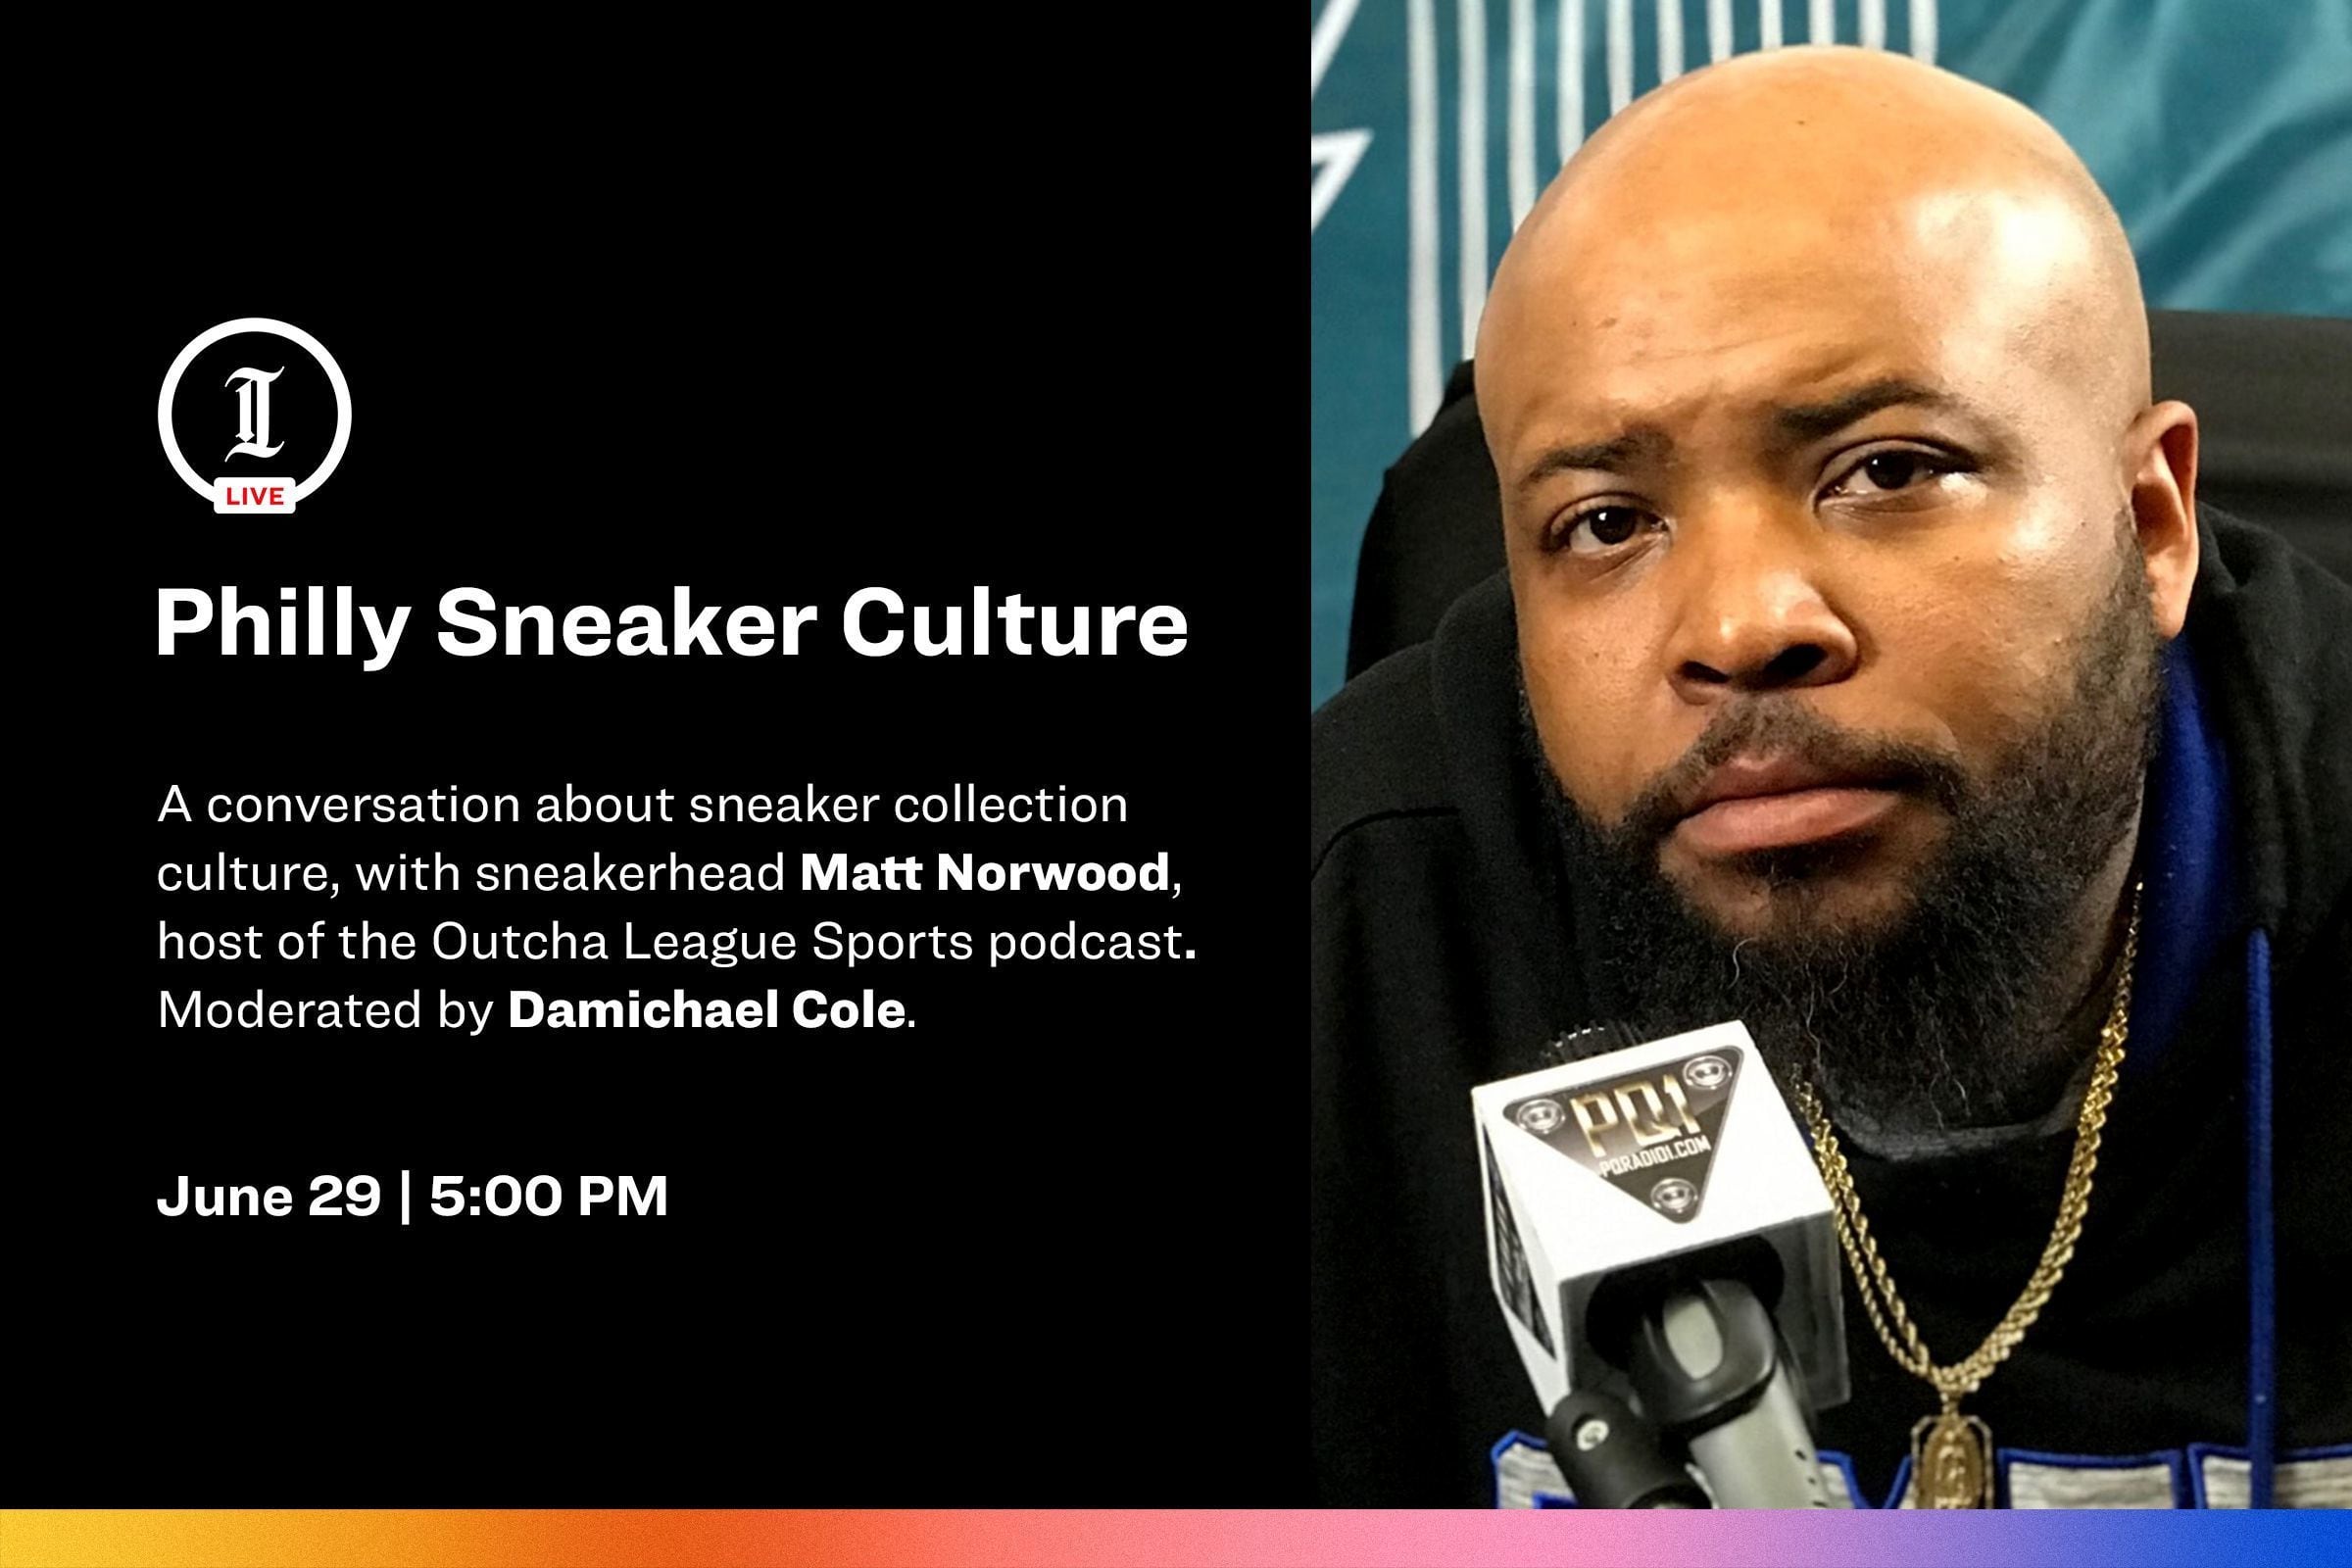 Allen Iverson Shoes: The Complete History - StockX News